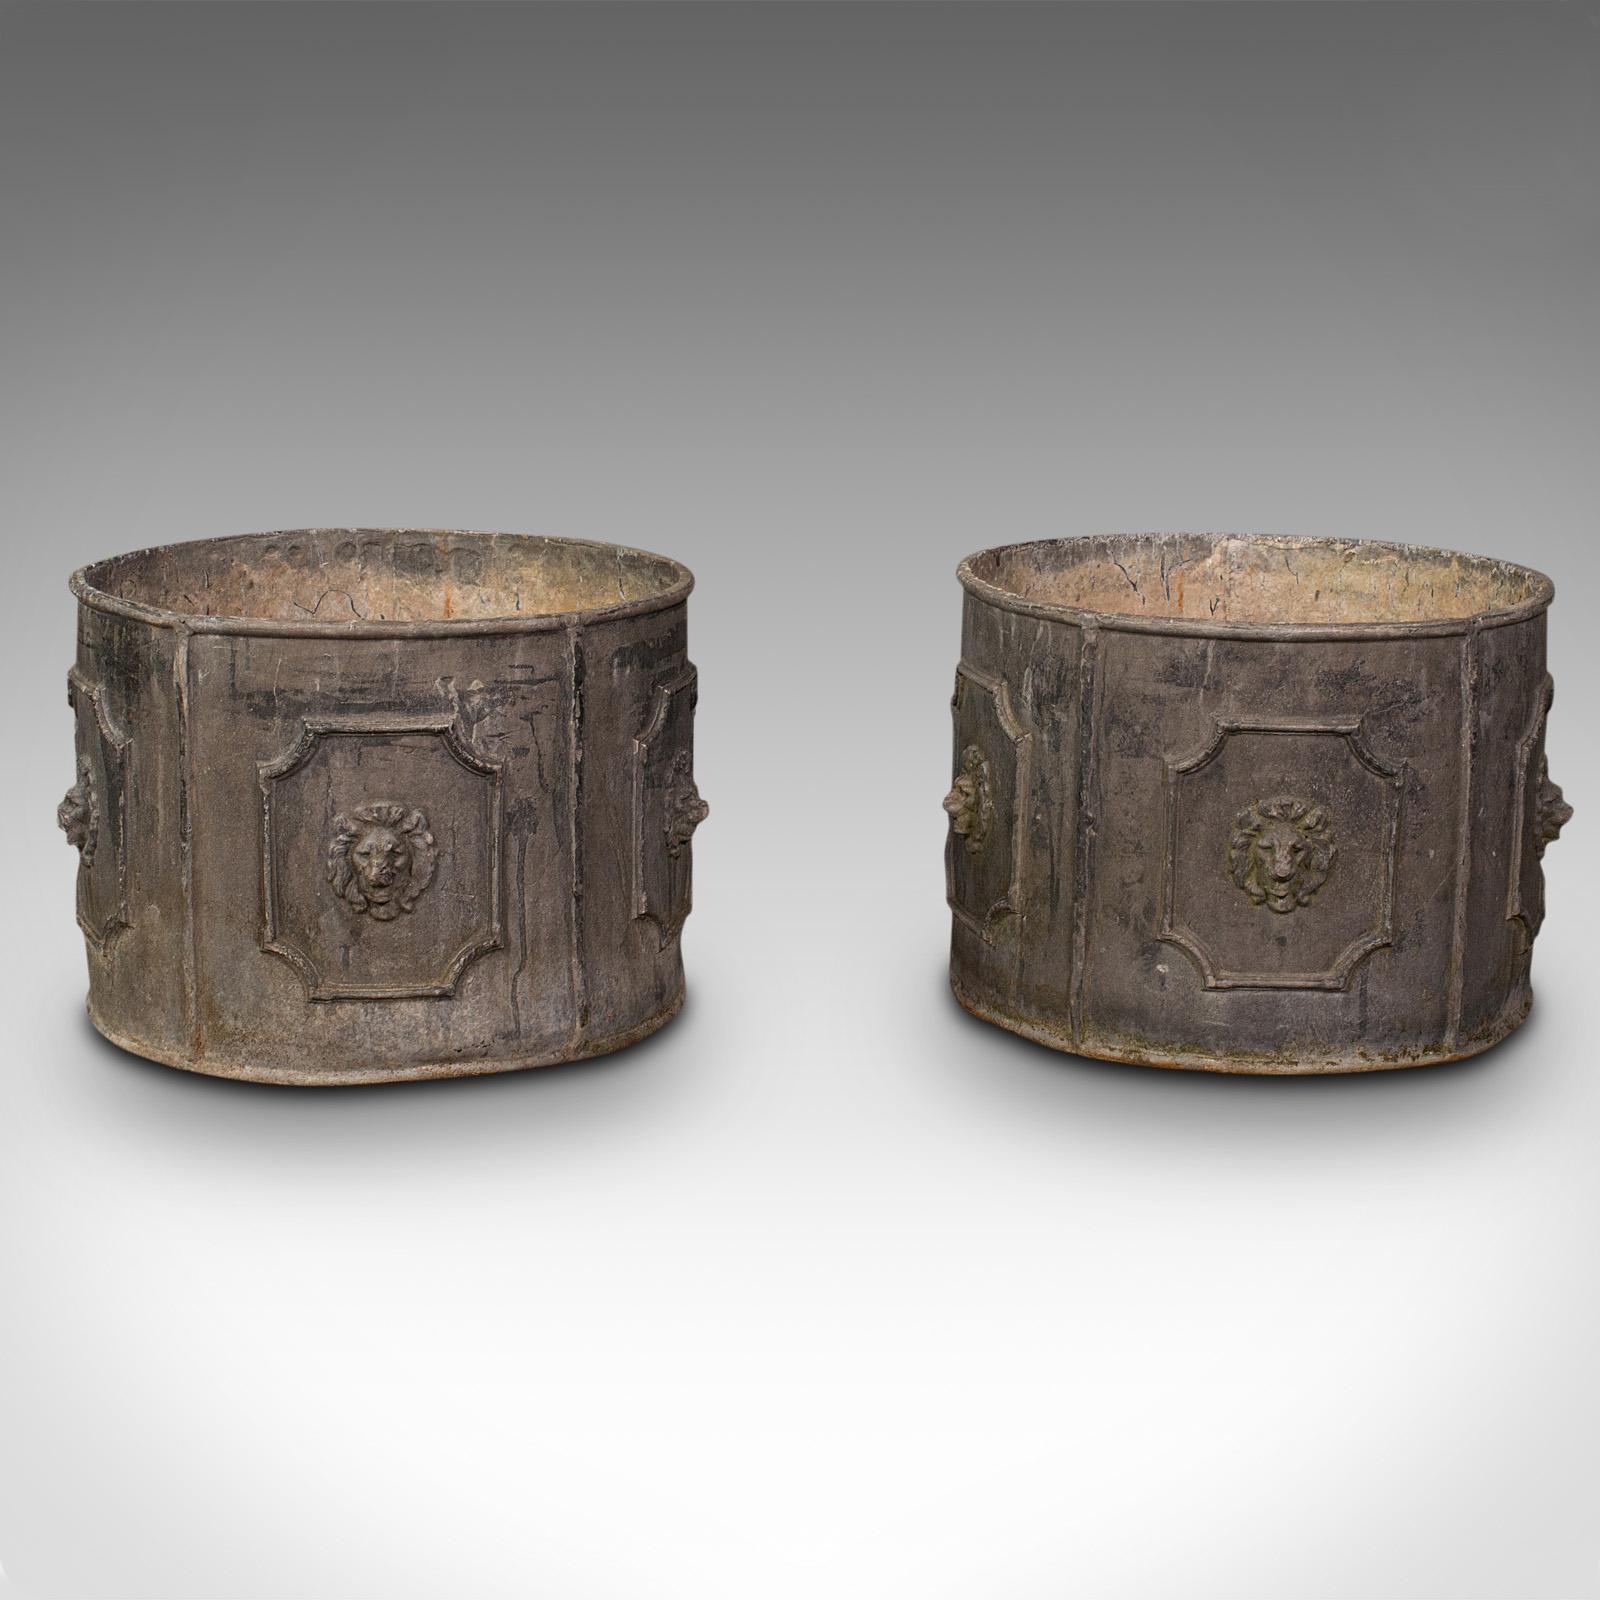 This is a pair of heavy antique planters. An English, lead circular planting pot, dating to the mid Victorian period, circa 1850.

Impressively heavy planters with tasteful Victorian period decoration
Displaying a desirable aged patina